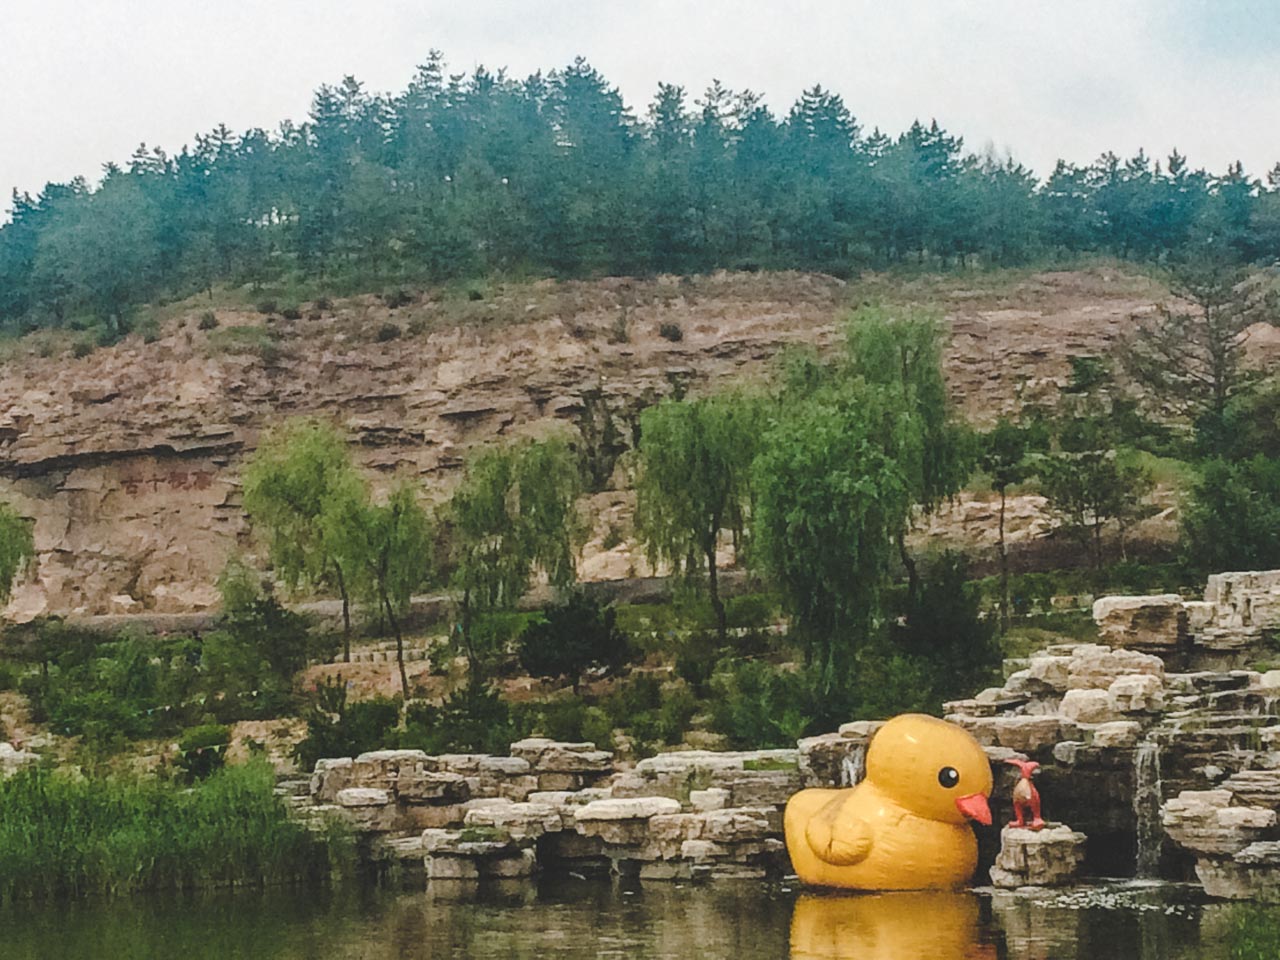 A rubber duck floating in the pond around the Lingyan Temple outside the Yungang Grottoes in Datong